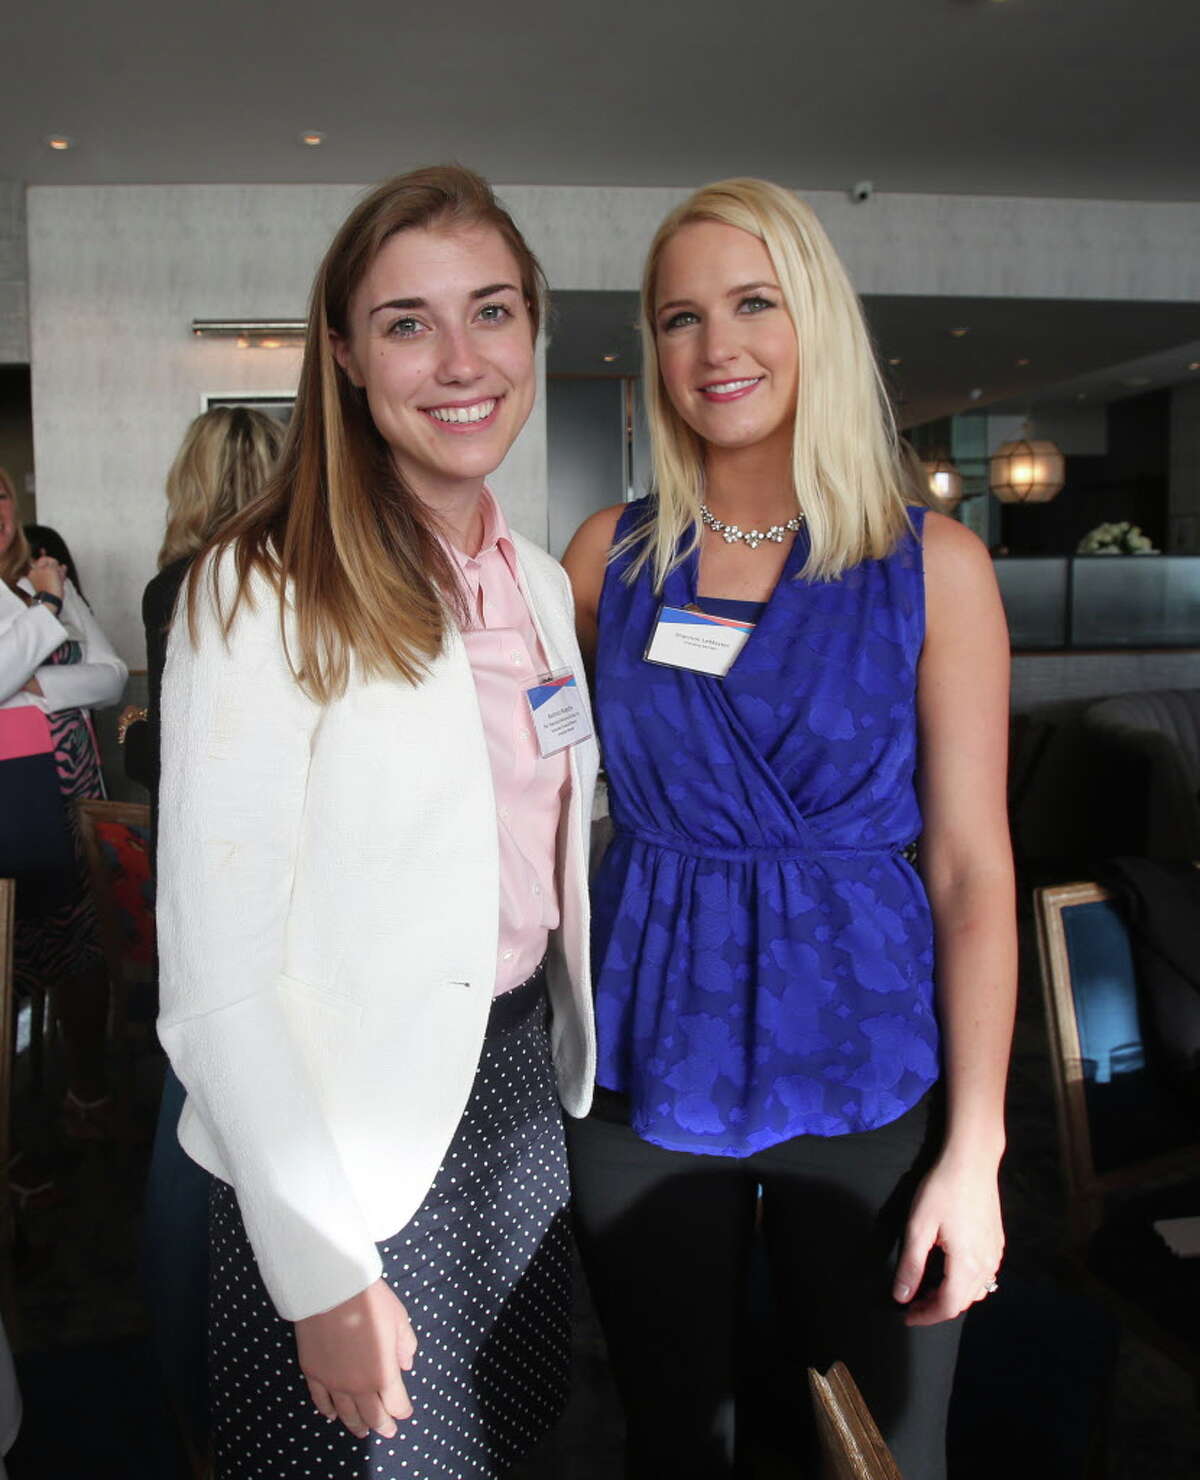 Beatrice Waesche and Shannon LeMaster at Ellevate Houston's executive breakfast.